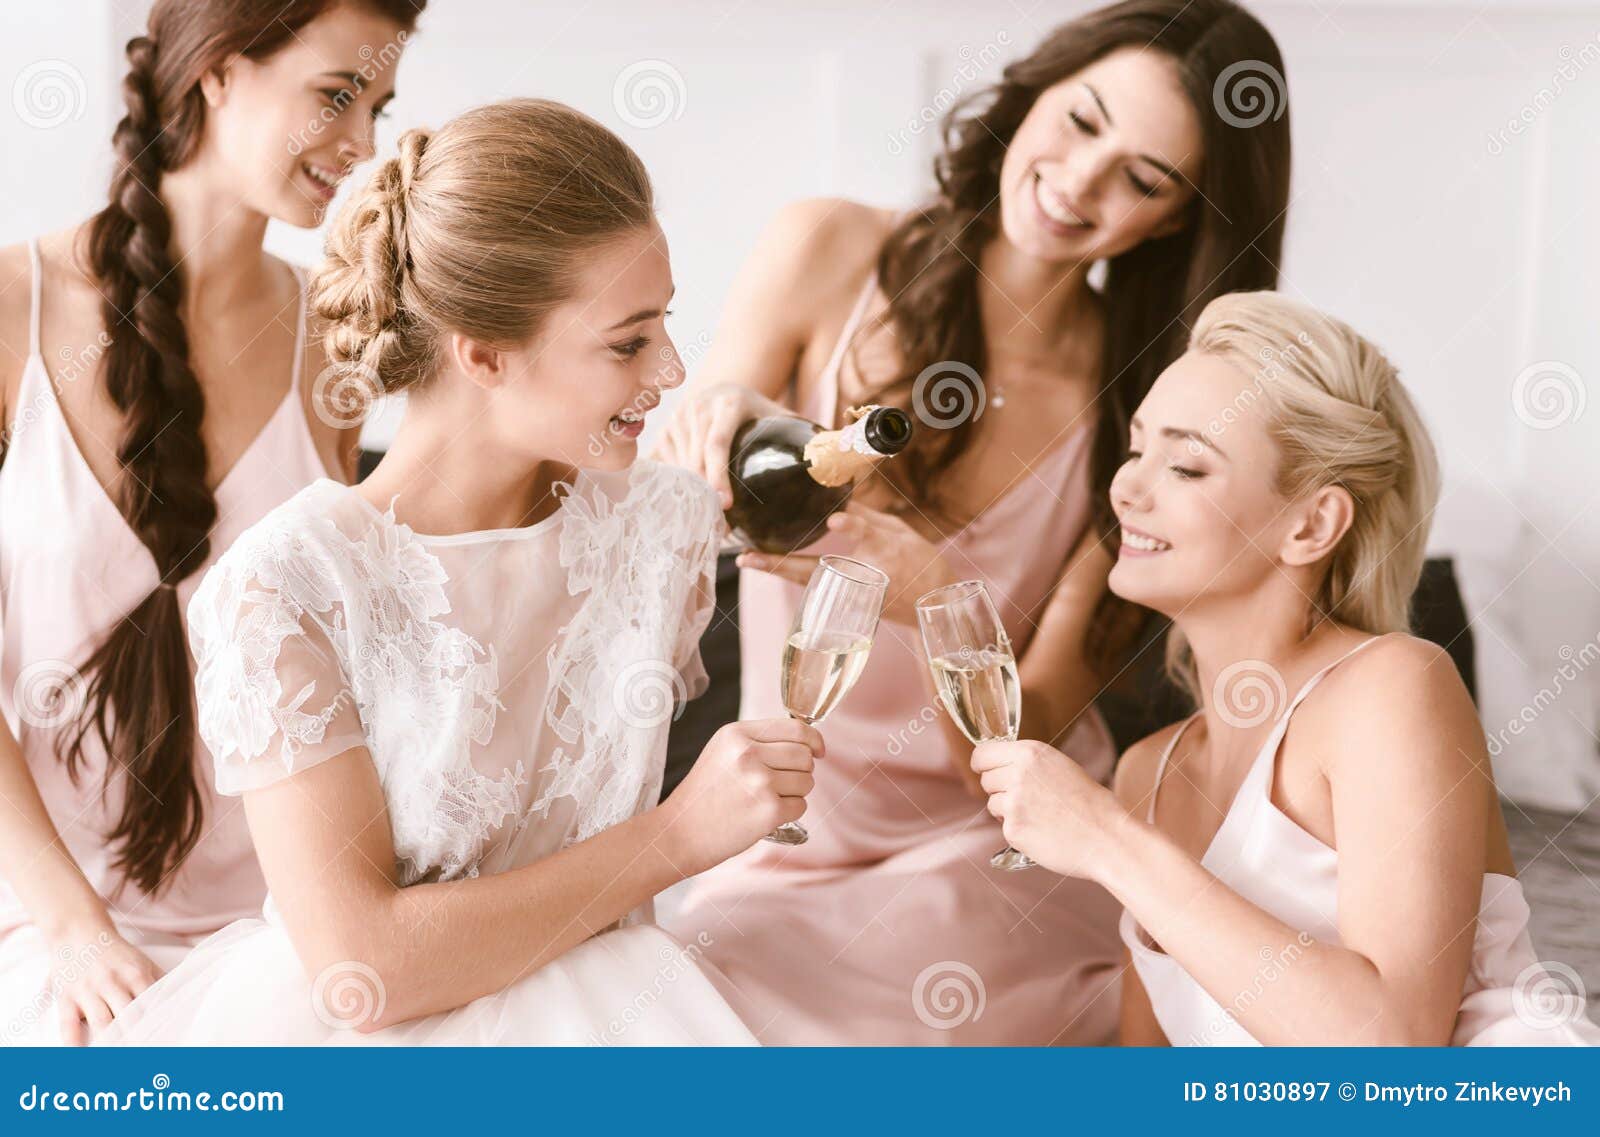 amused bride and bridesmaids having hen party at home